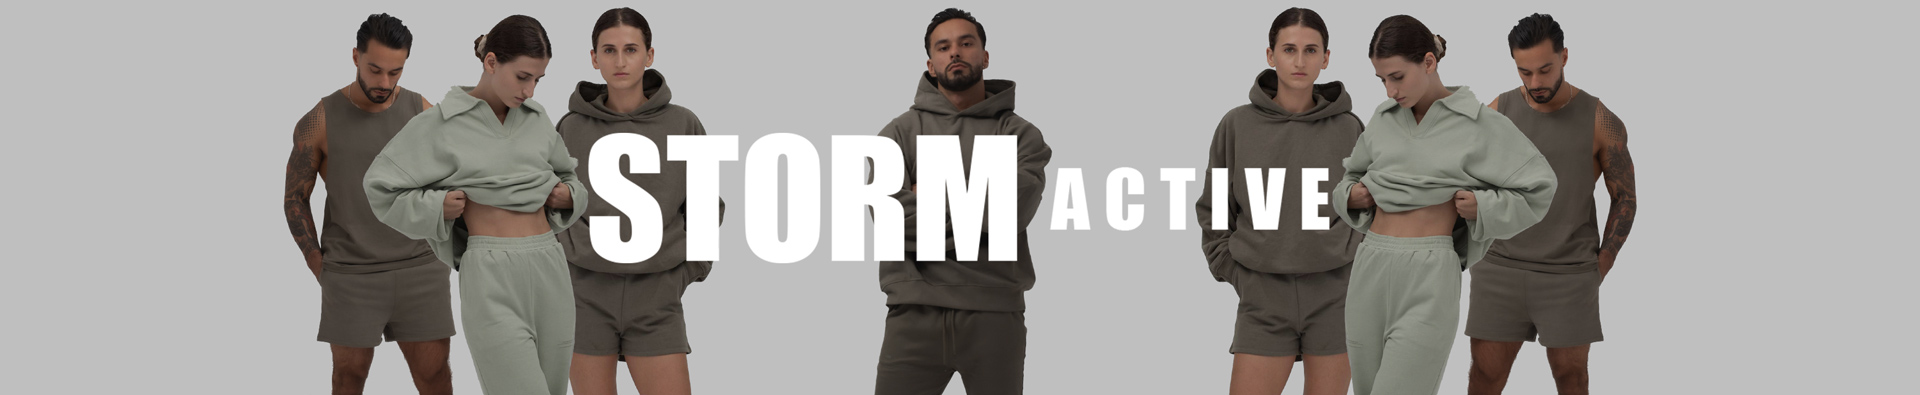 Storm Active Clothing